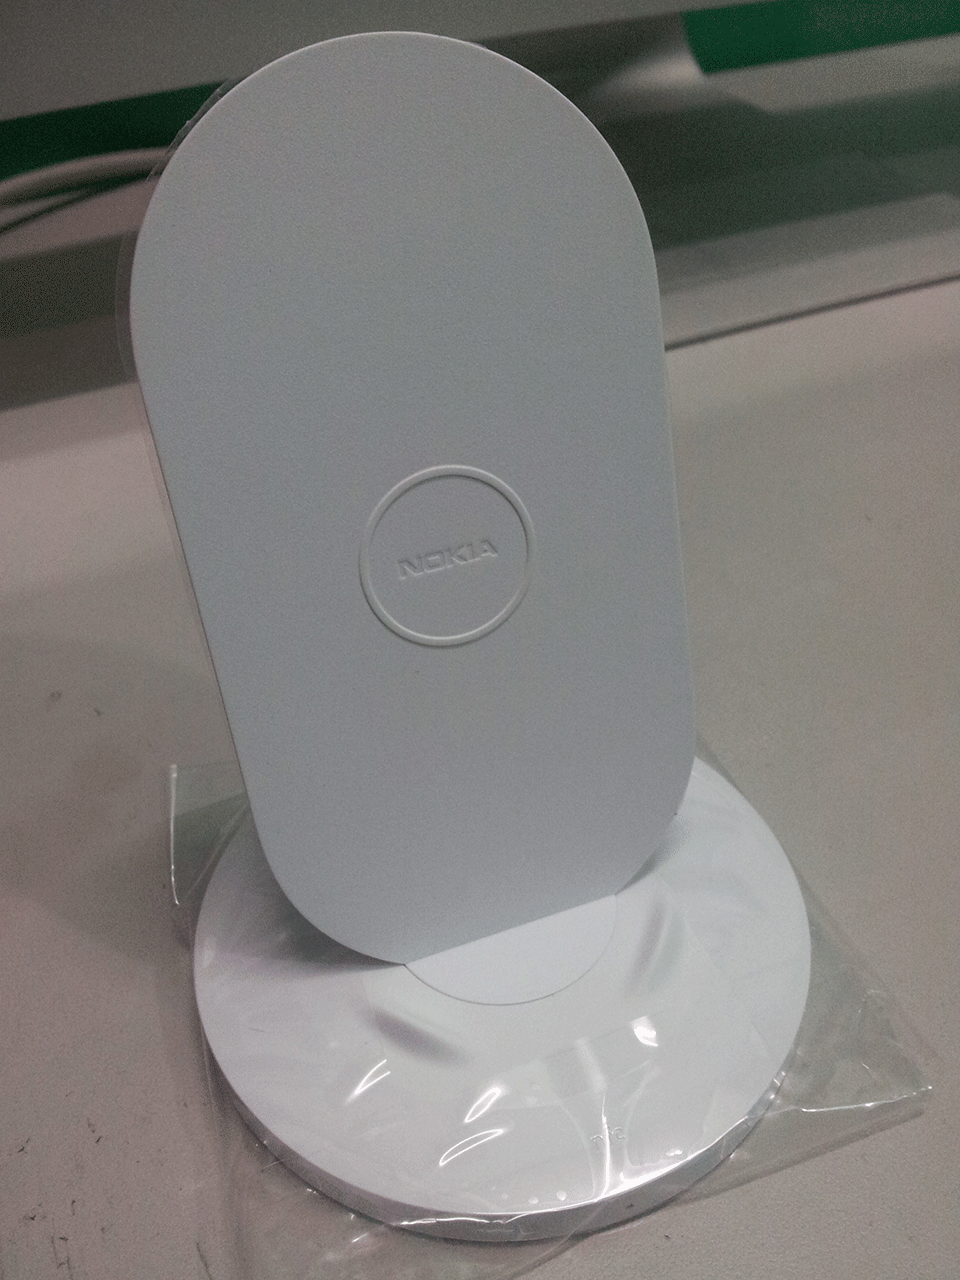 Malaysia Nokia Wireless Charging Stand DT-910 with NFC